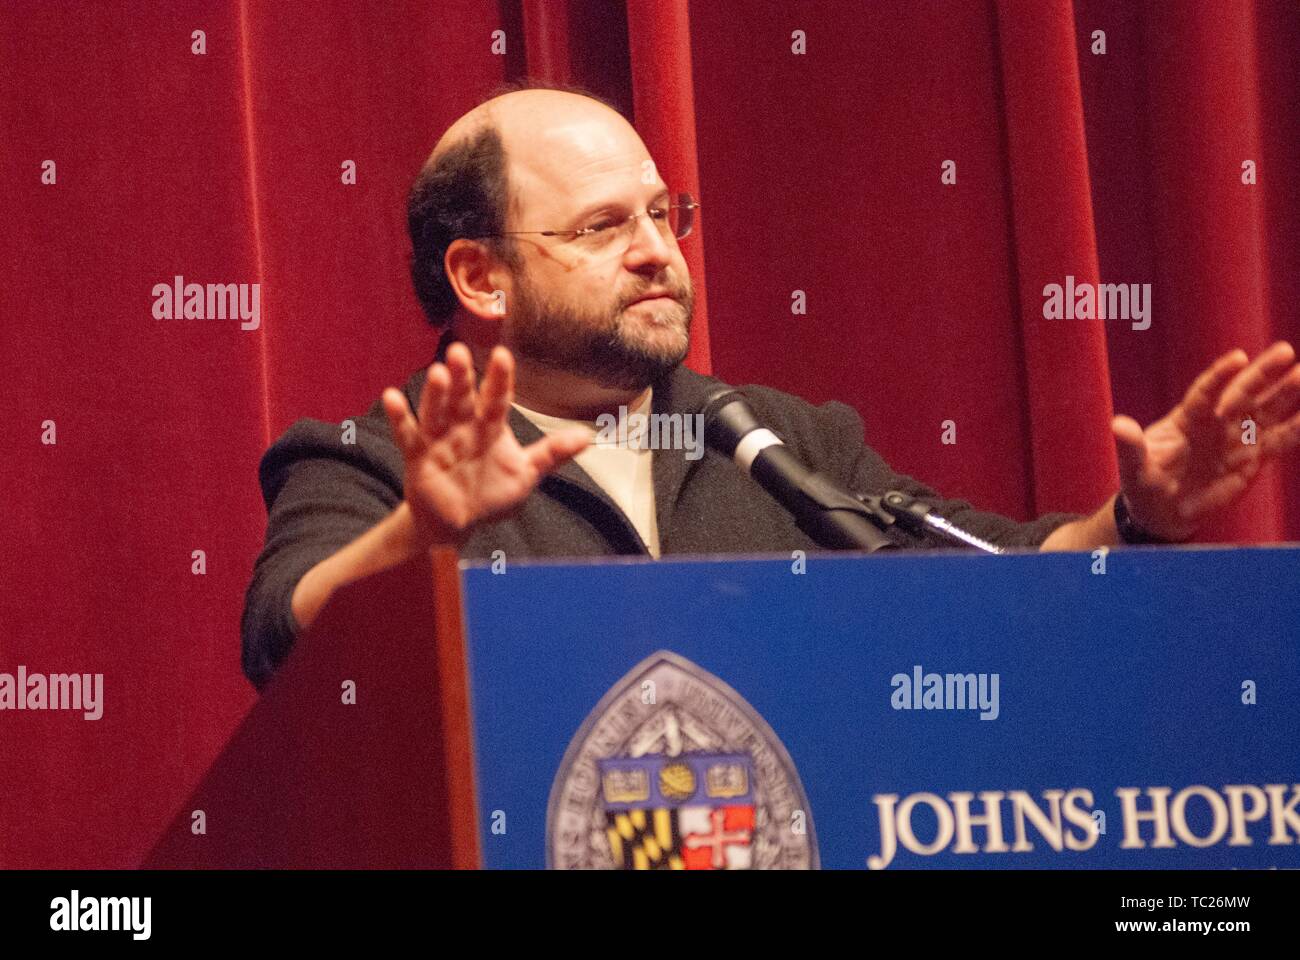 Actor and comedian Jason Alexander speaks from a podium during a Milton S Eisenhower Symposium, Homewood Campus of Johns Hopkins University, Baltimore, Maryland, October 13, 2006. From the Homewood Photography Collection. () Stock Photo